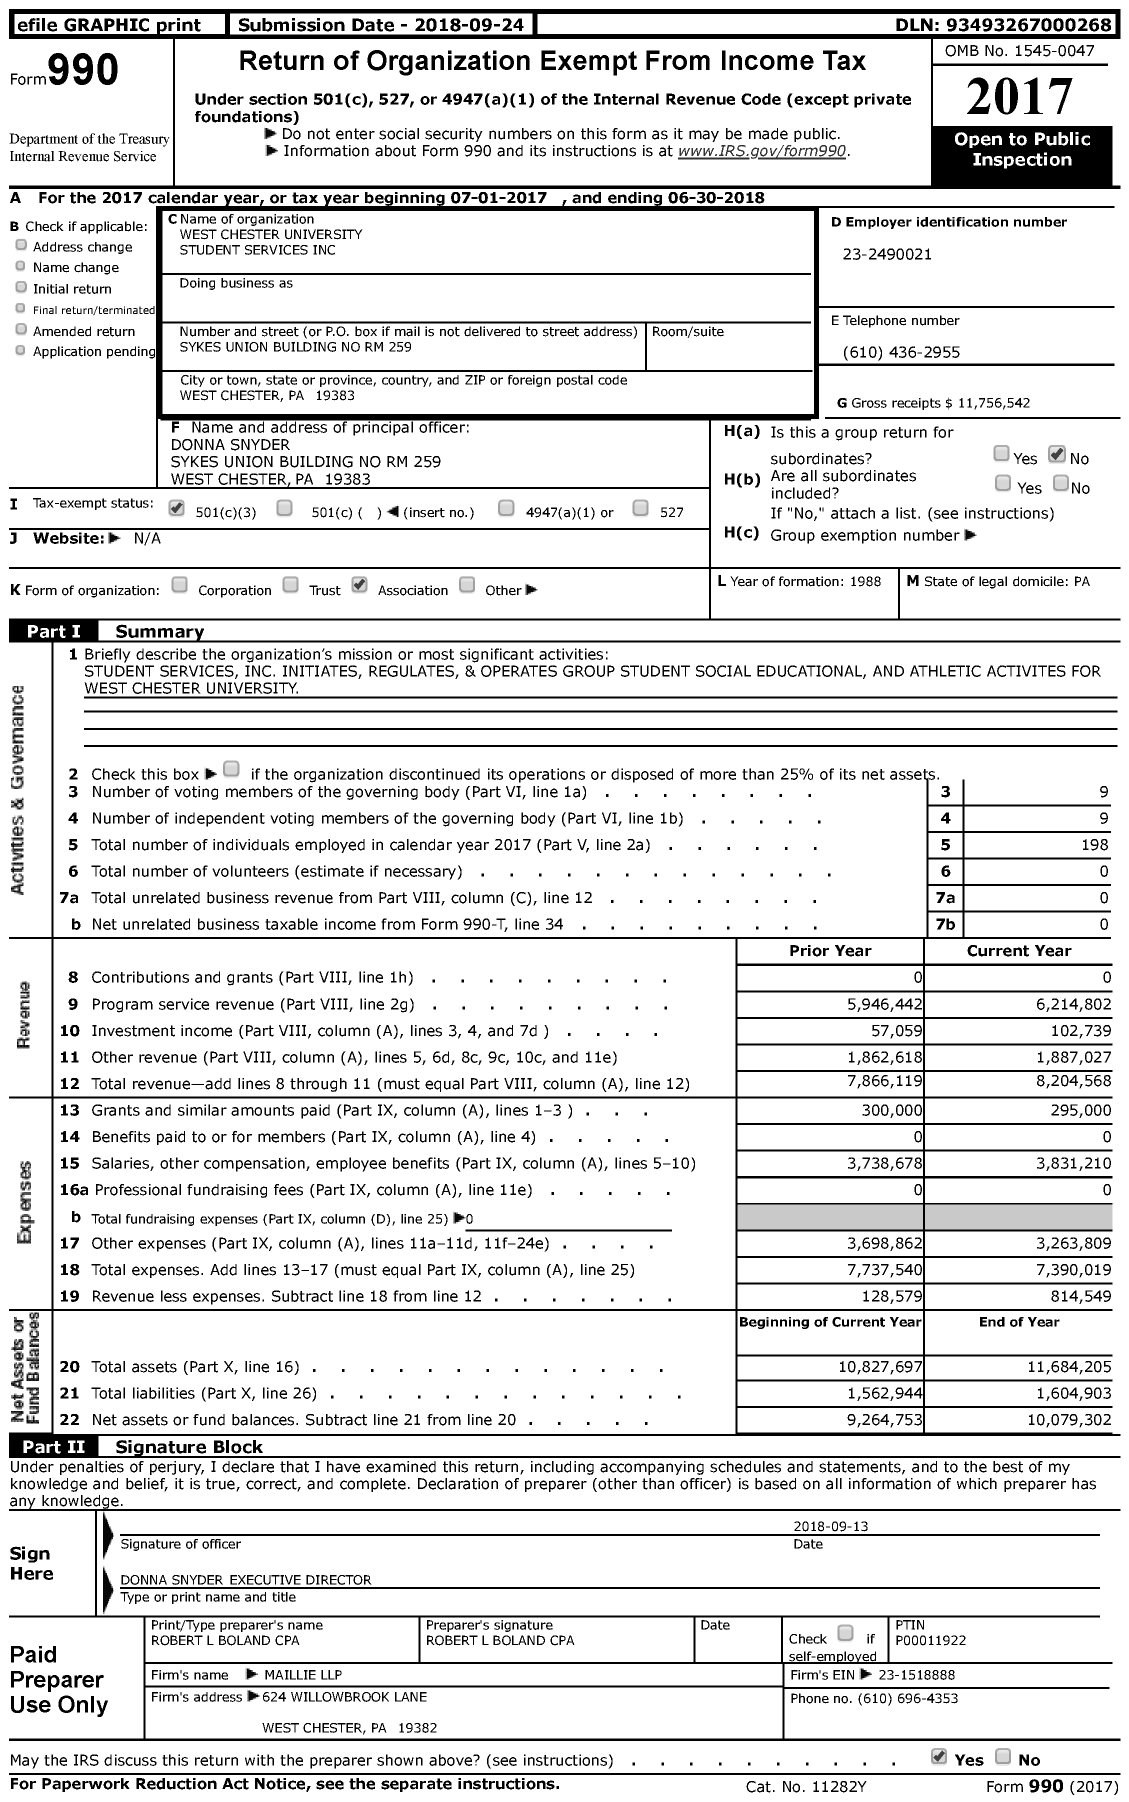 Image of first page of 2017 Form 990 for West Chester University Student Services